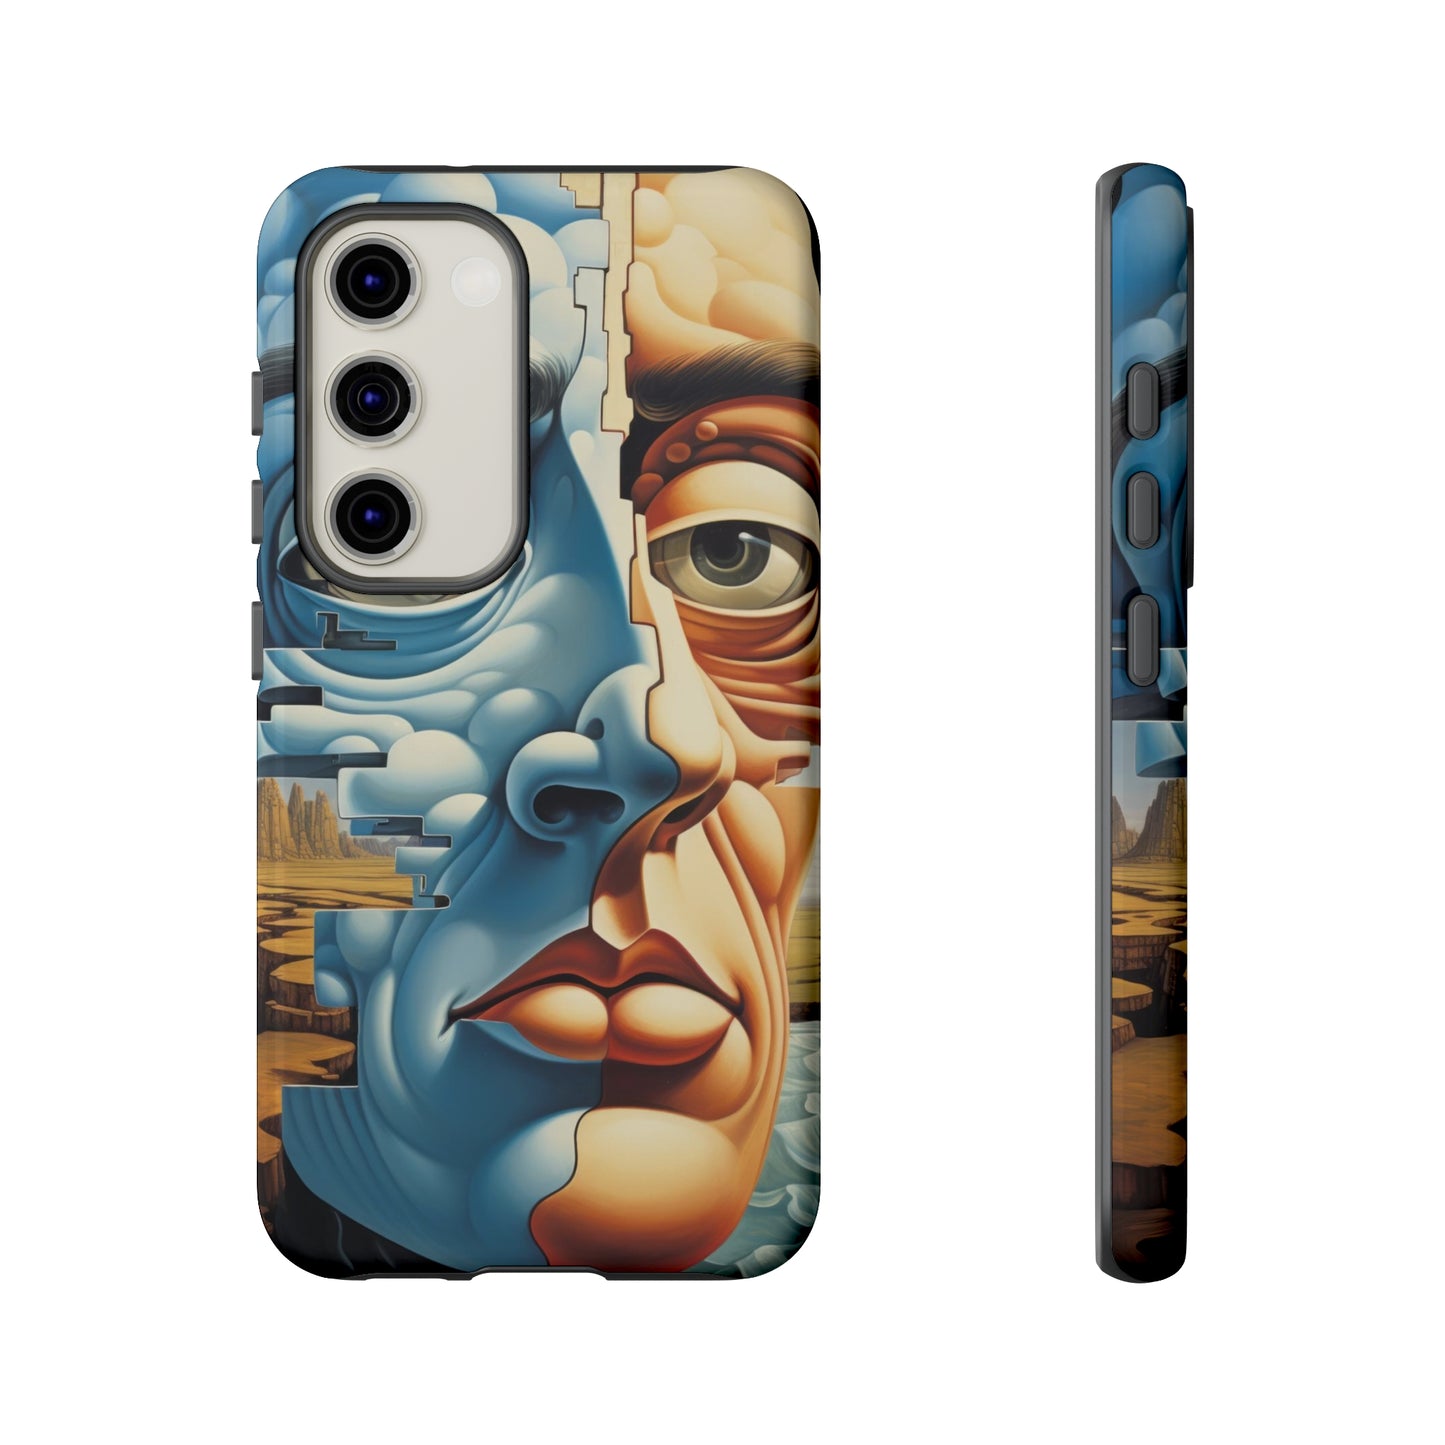 Cubist Cascade: Dual-Toned Face in Watery Reverie Phone Case for iPhone, Samsung, Pixel